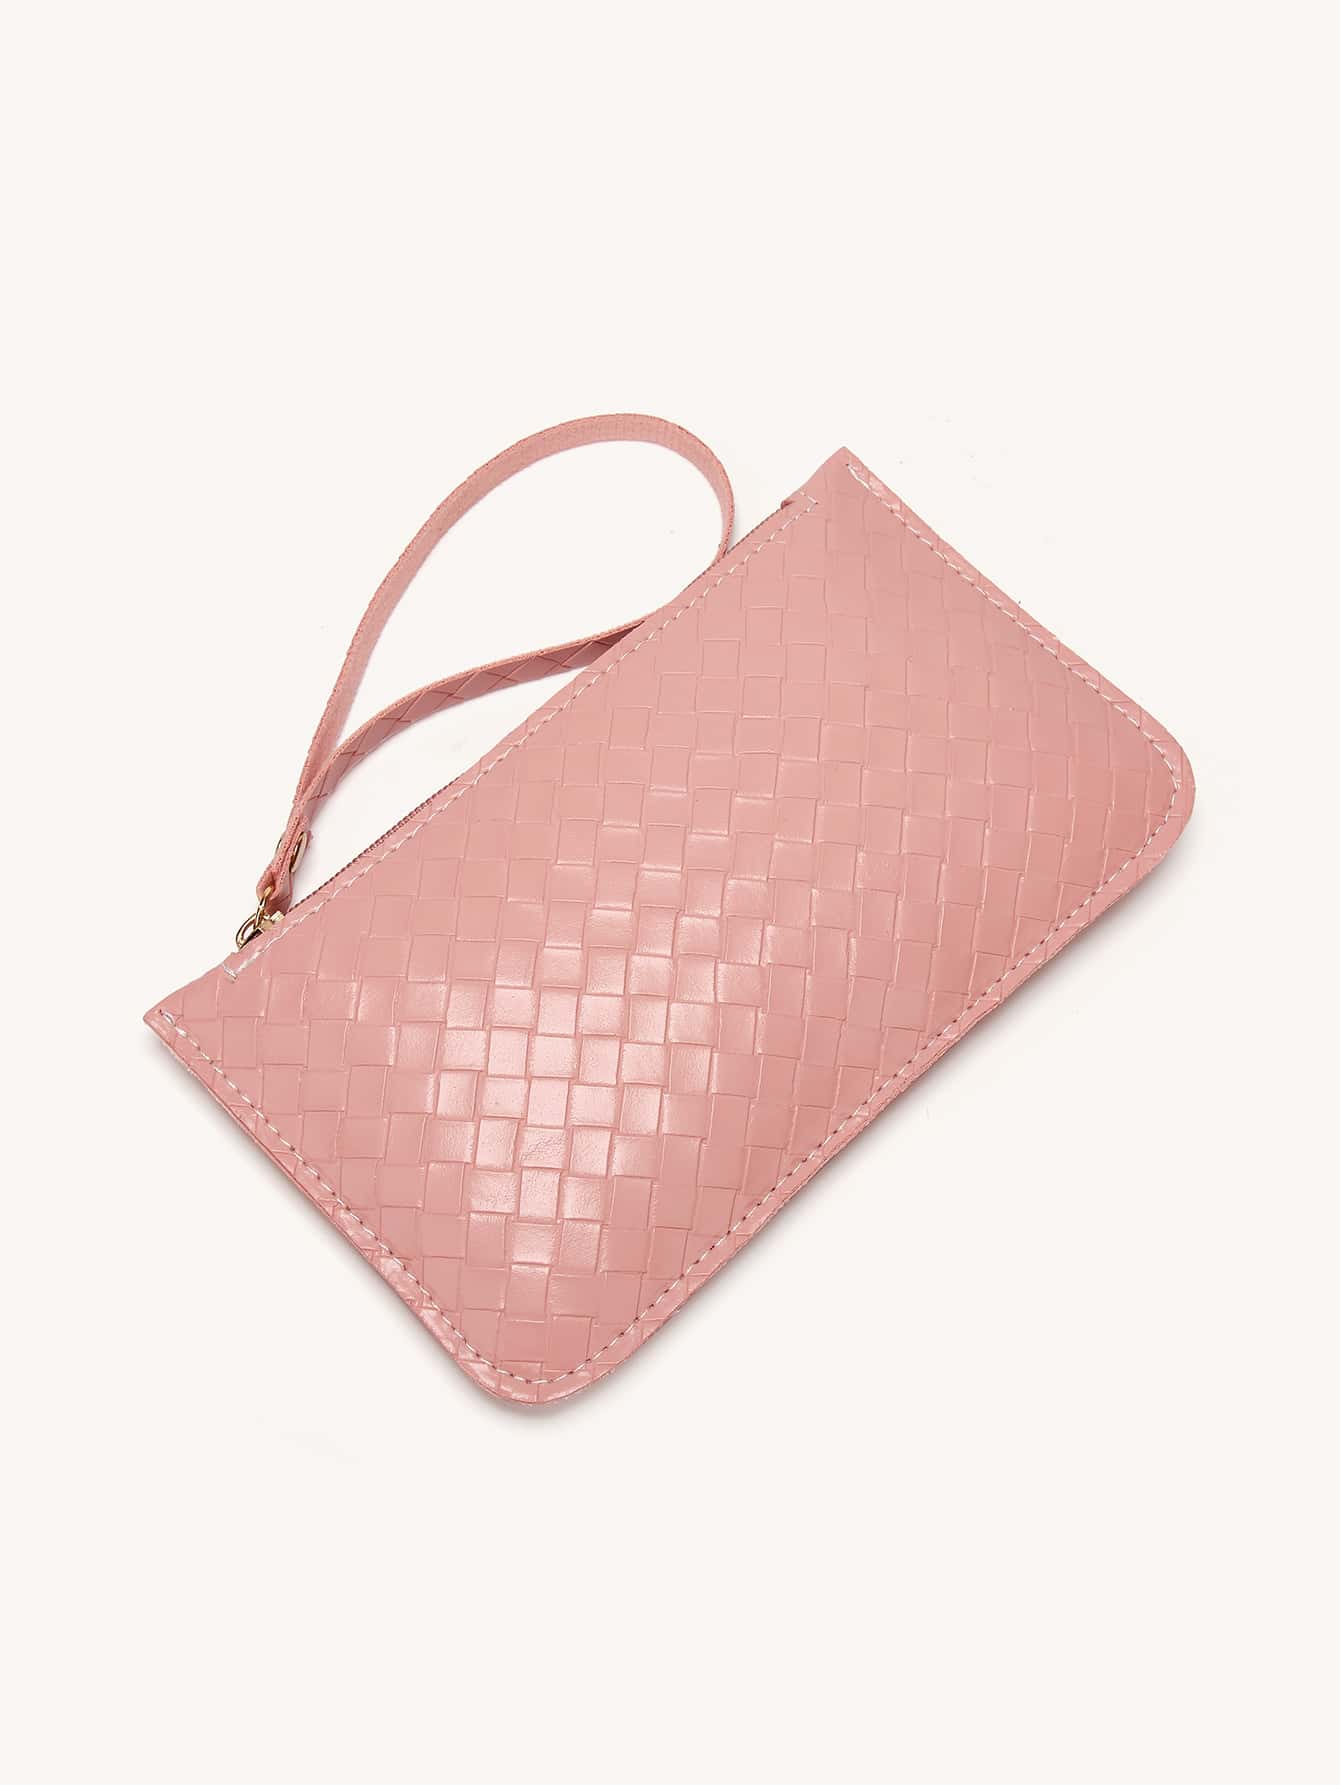 Woven Pattern Clutch Bag With Wristlet